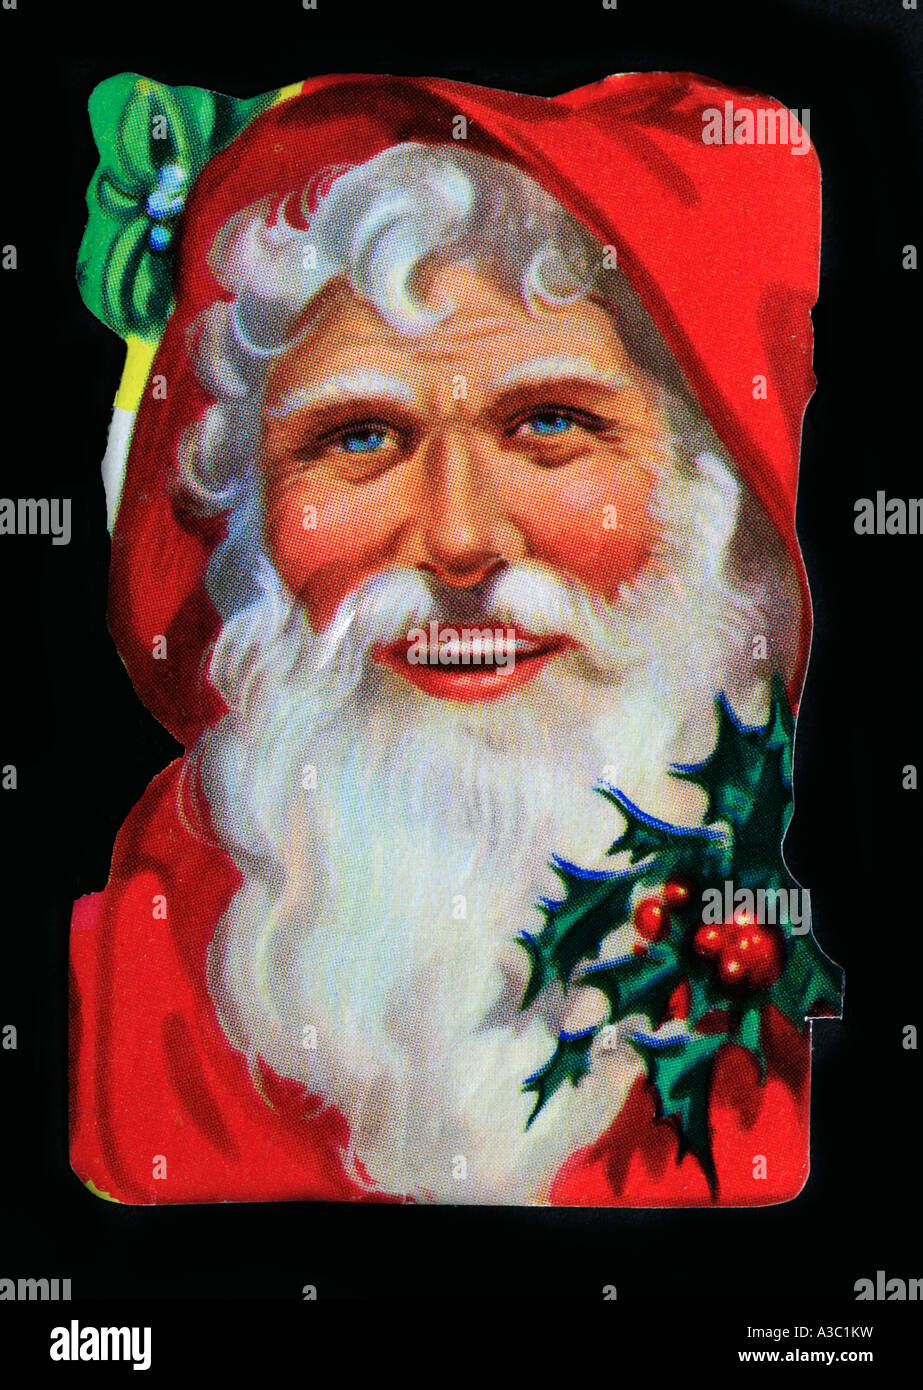 An old style English cut out sticker of Santa Claus Stock Photo